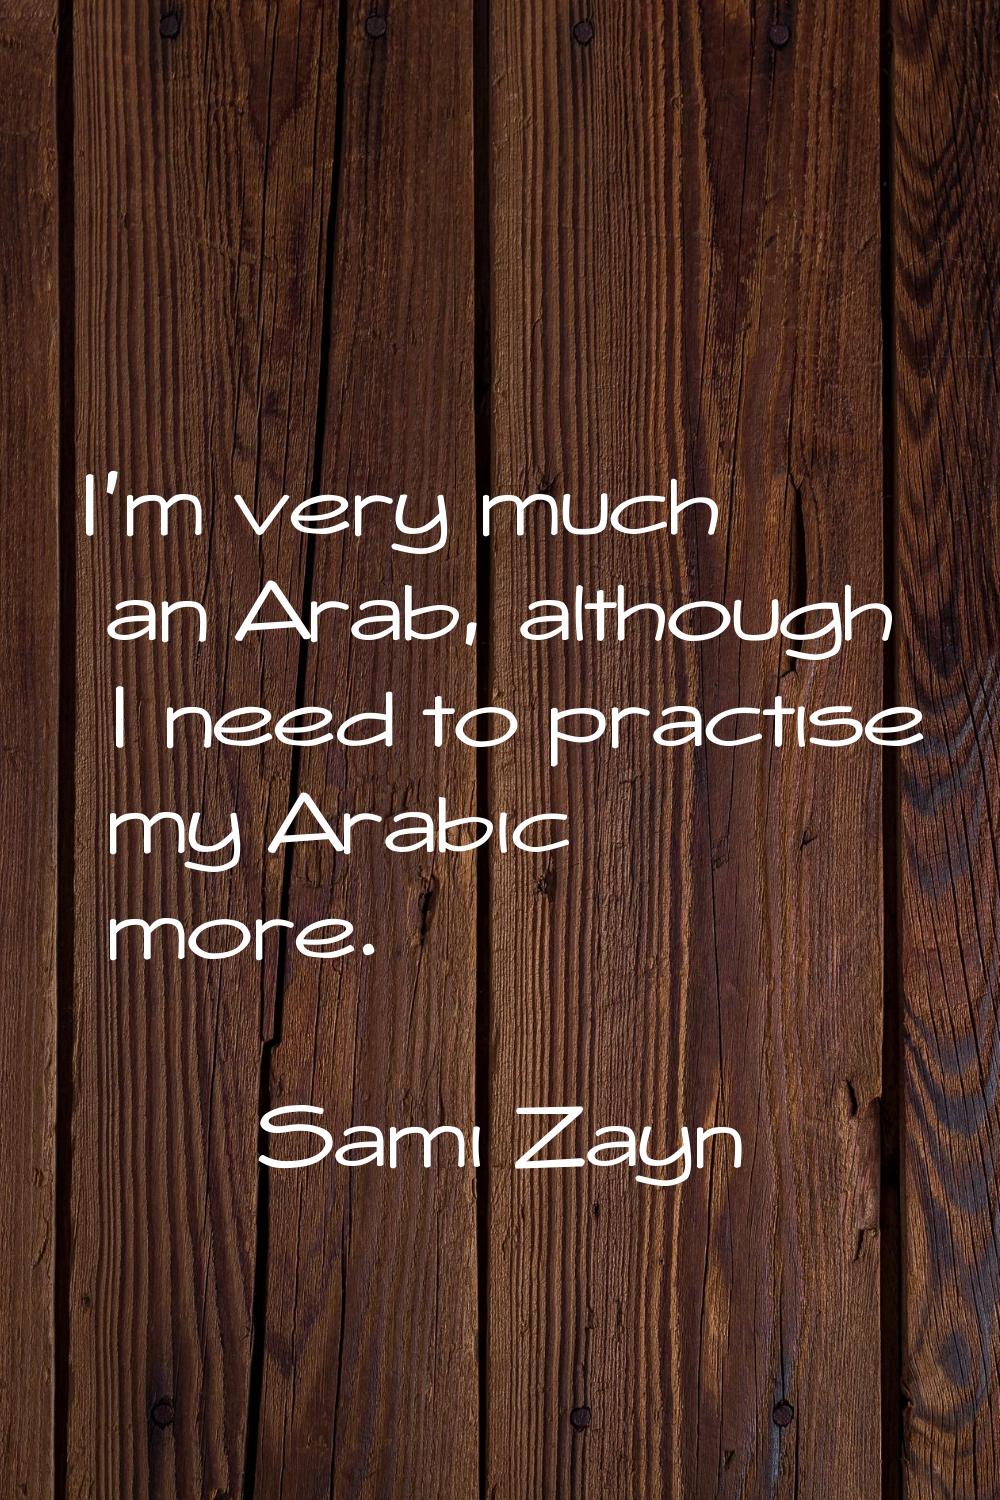 I'm very much an Arab, although I need to practise my Arabic more.